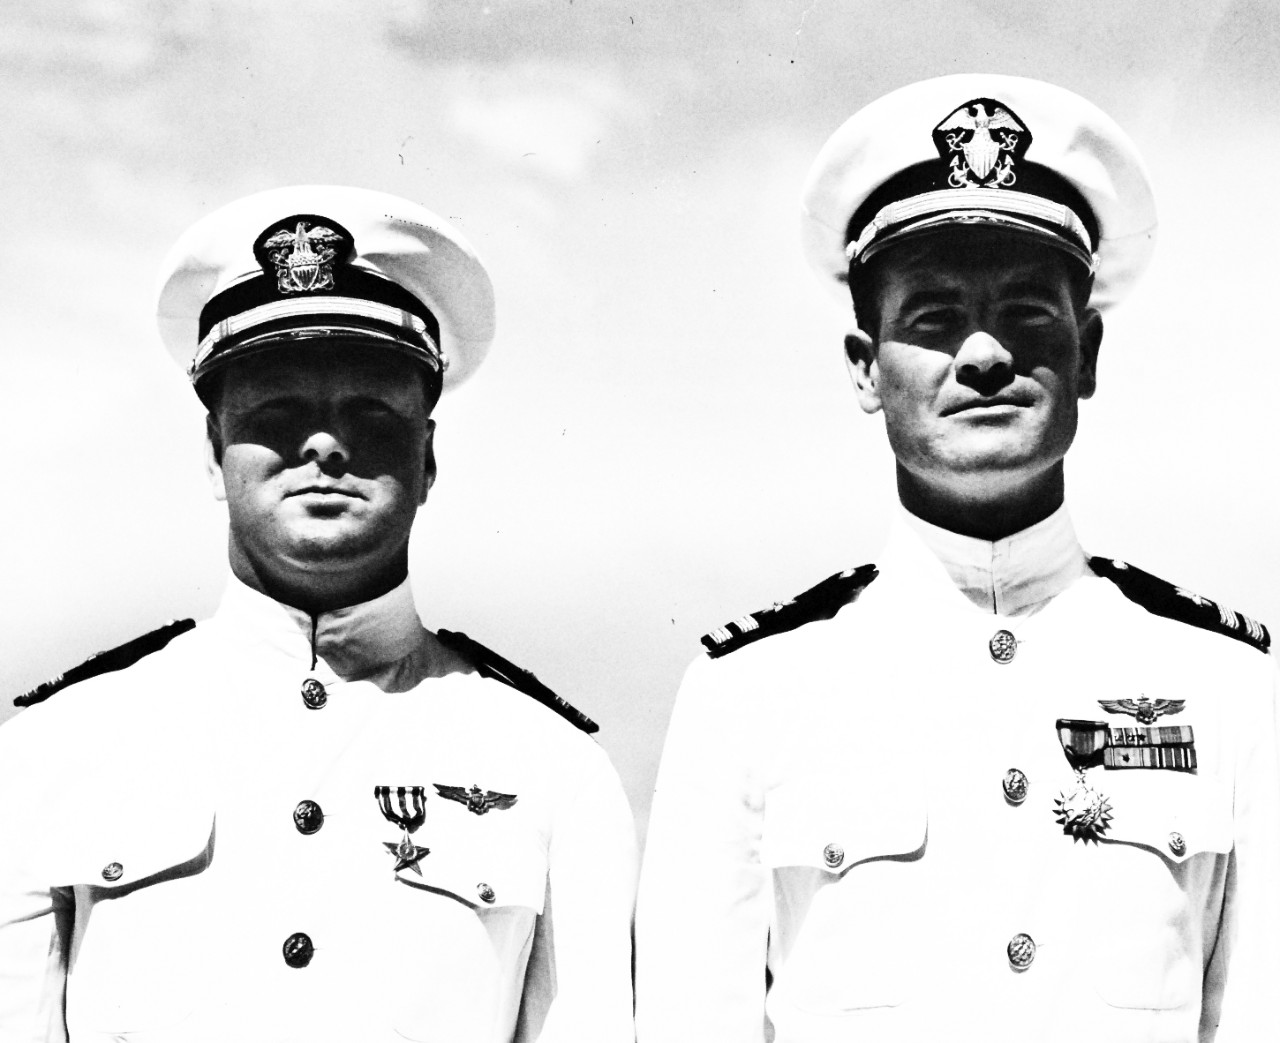 80-G-42692:  Lieutenant August A. Barthes, USN, and Lieutenant Joseph M. Kellam, USN, Silver Star.    Naval Operating Base, Bermuda, after the presentation of awards by Rear Admiral I.C. Sowell, Lieutenant Joseph M. Kellam (left) who received the Silver Star for gallantry in action in the South Pacific Lieutenant Joseph M. Kellam, USN, (left) who received the Silver Star for gallantry in action in the South Pacific and Lieutenant August A. Barthes, who was awarded the Air Medal for bravery in the Battle of Midway, June 12, 1943.    Official U.S. Navy Photograph, now in the collections of the National Archives.   (2017/08/01).  